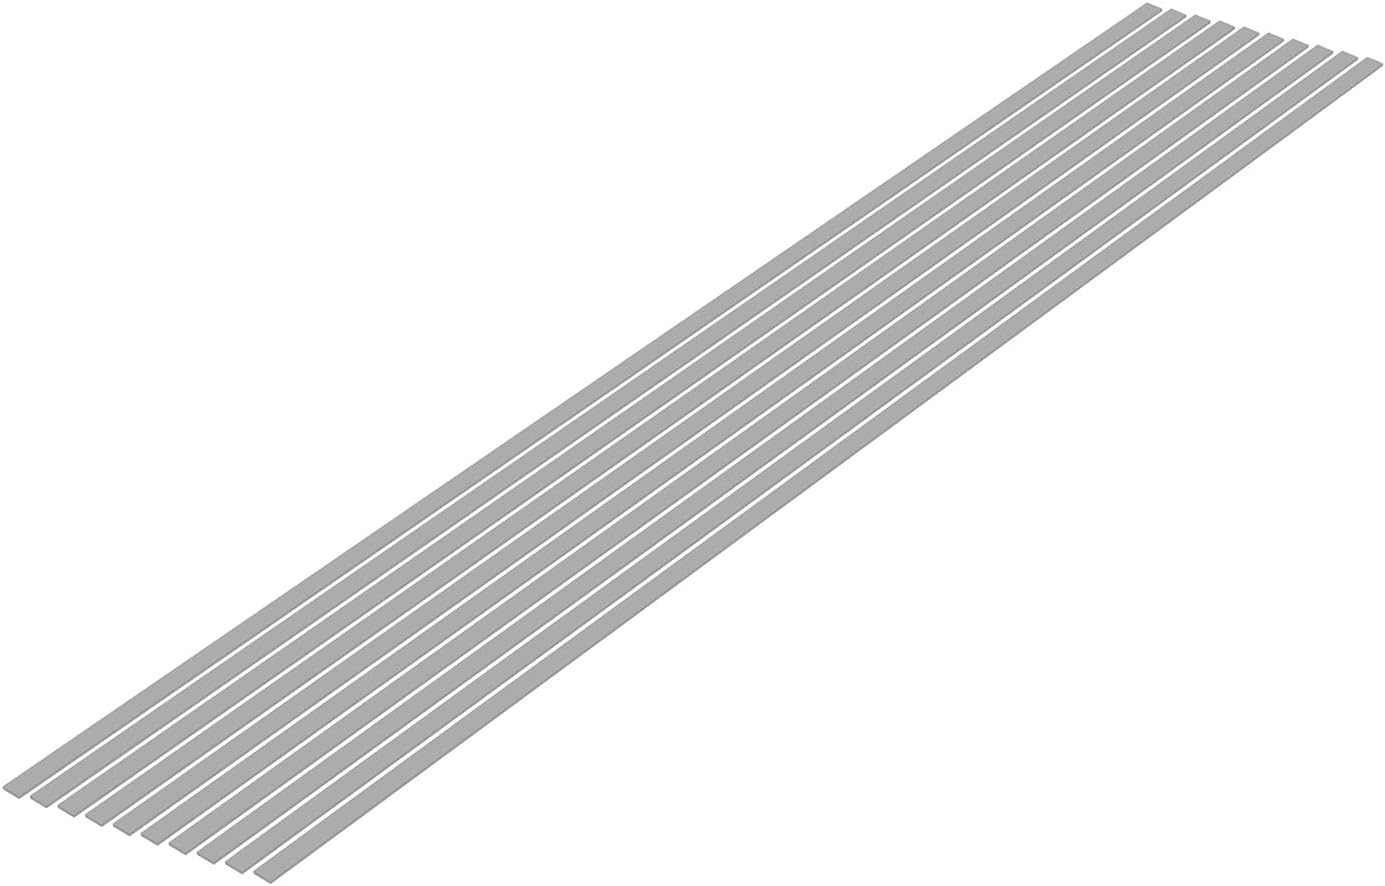 Wave Material Series OM-474 Plastic Material, Gray, Shredded Board, 0.02 x 0.16 inches (0.5 x 4.0 mm), 10 Pieces, Hobby Material - BanzaiHobby